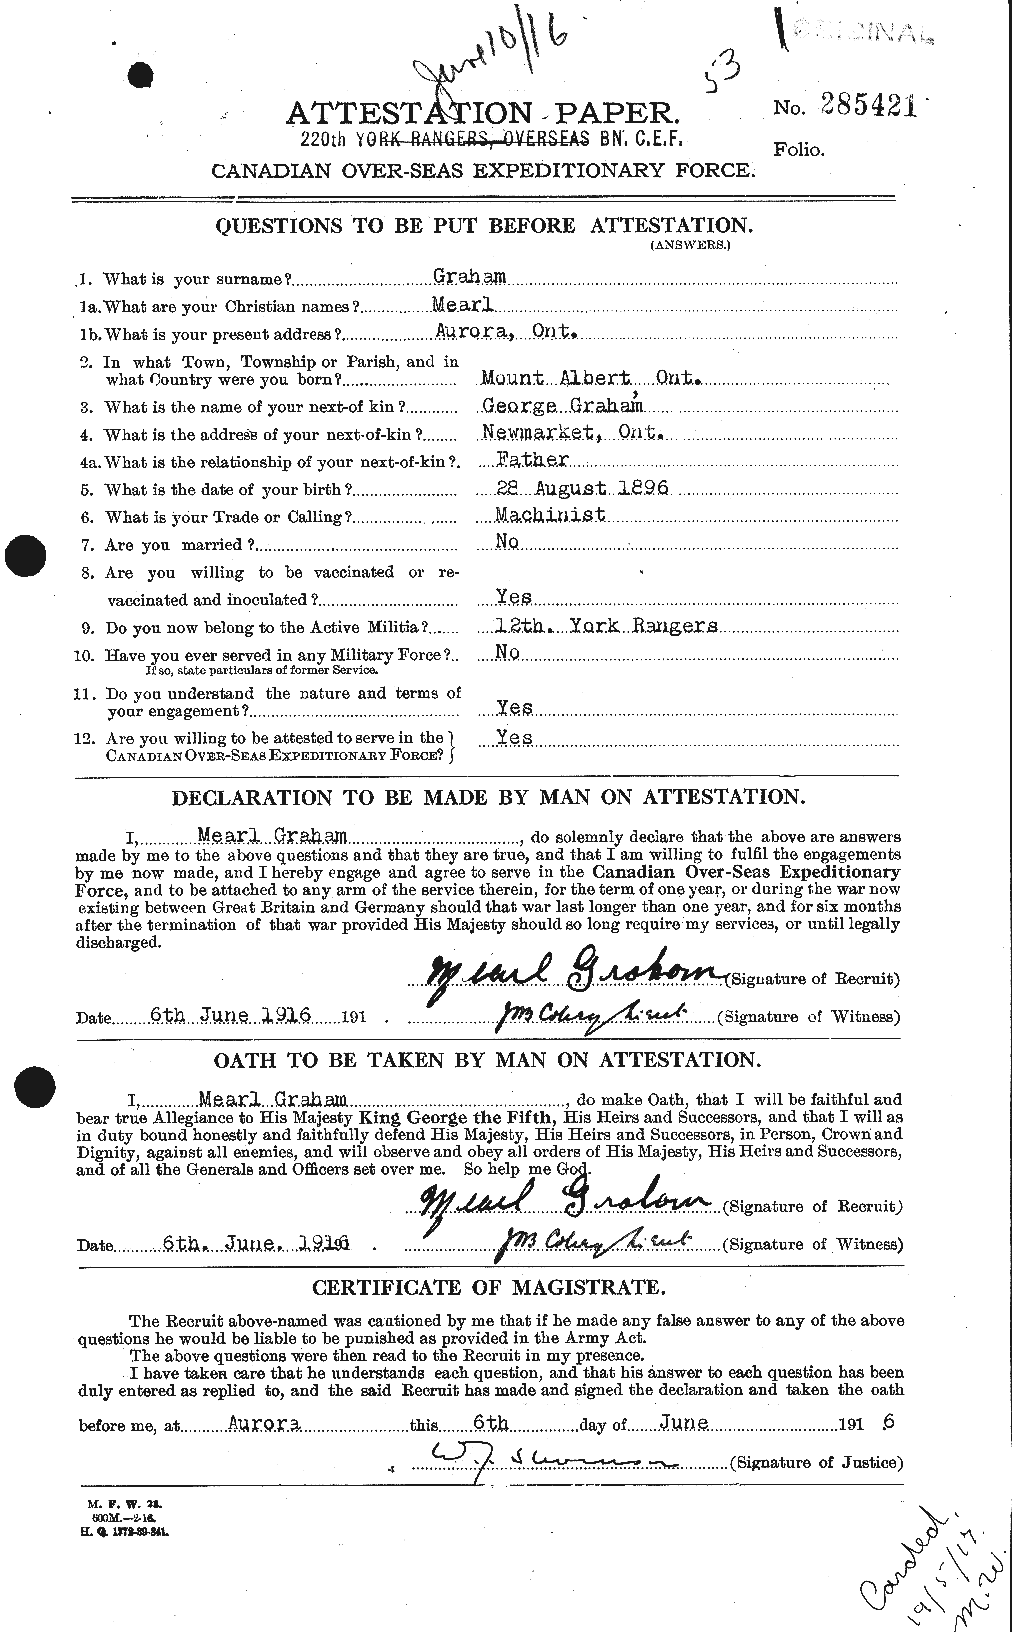 Personnel Records of the First World War - CEF 359300a